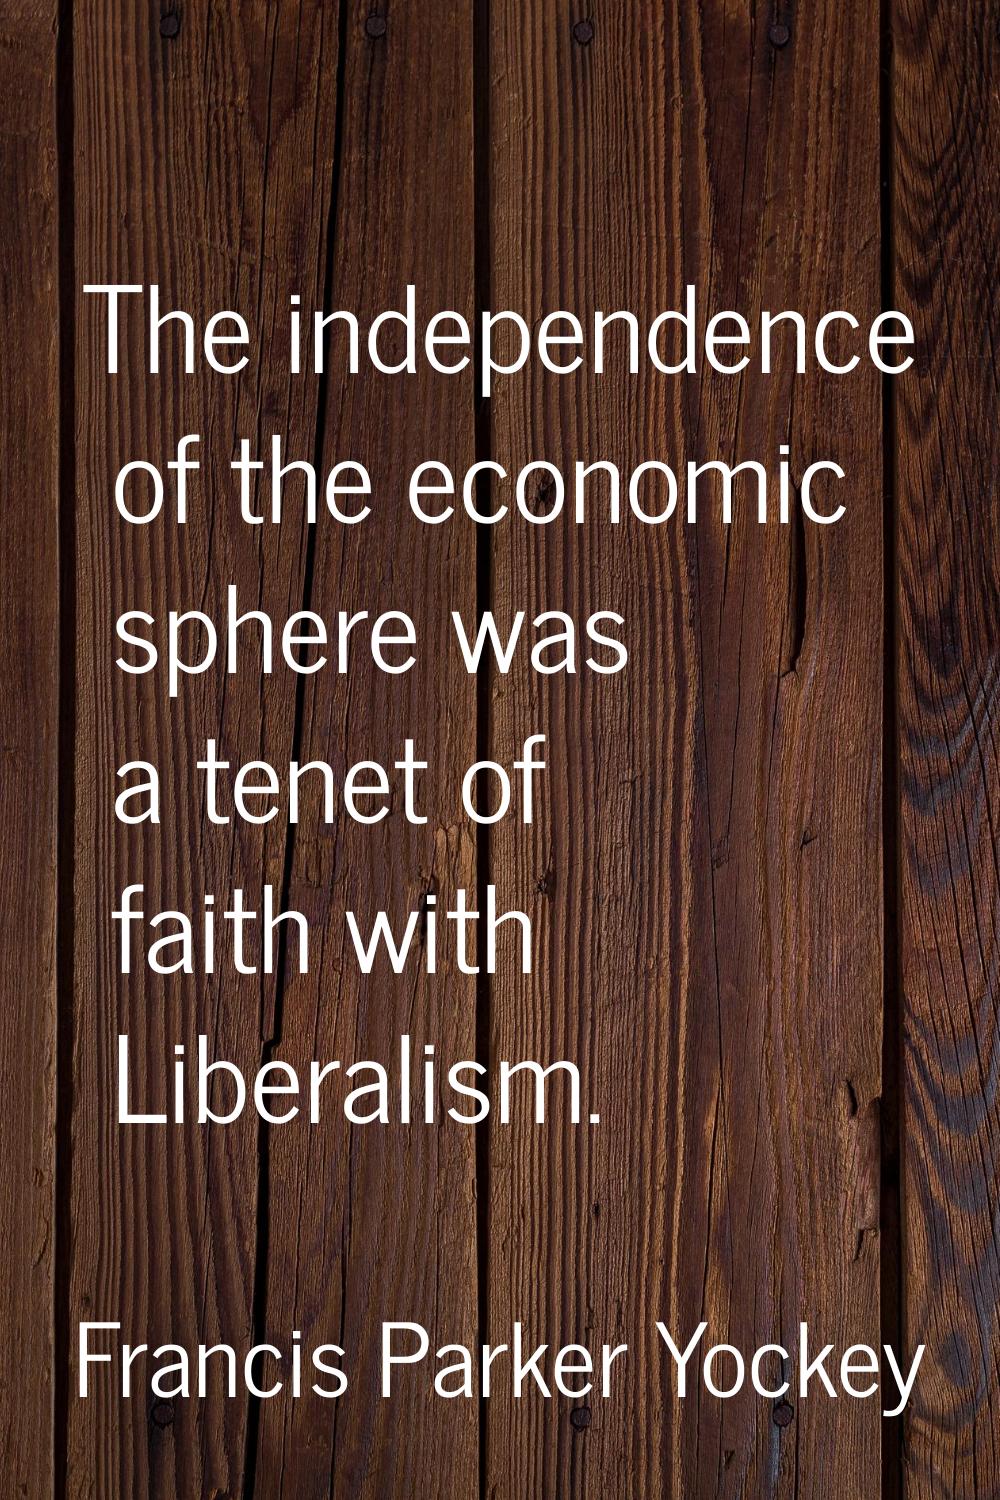 The independence of the economic sphere was a tenet of faith with Liberalism.